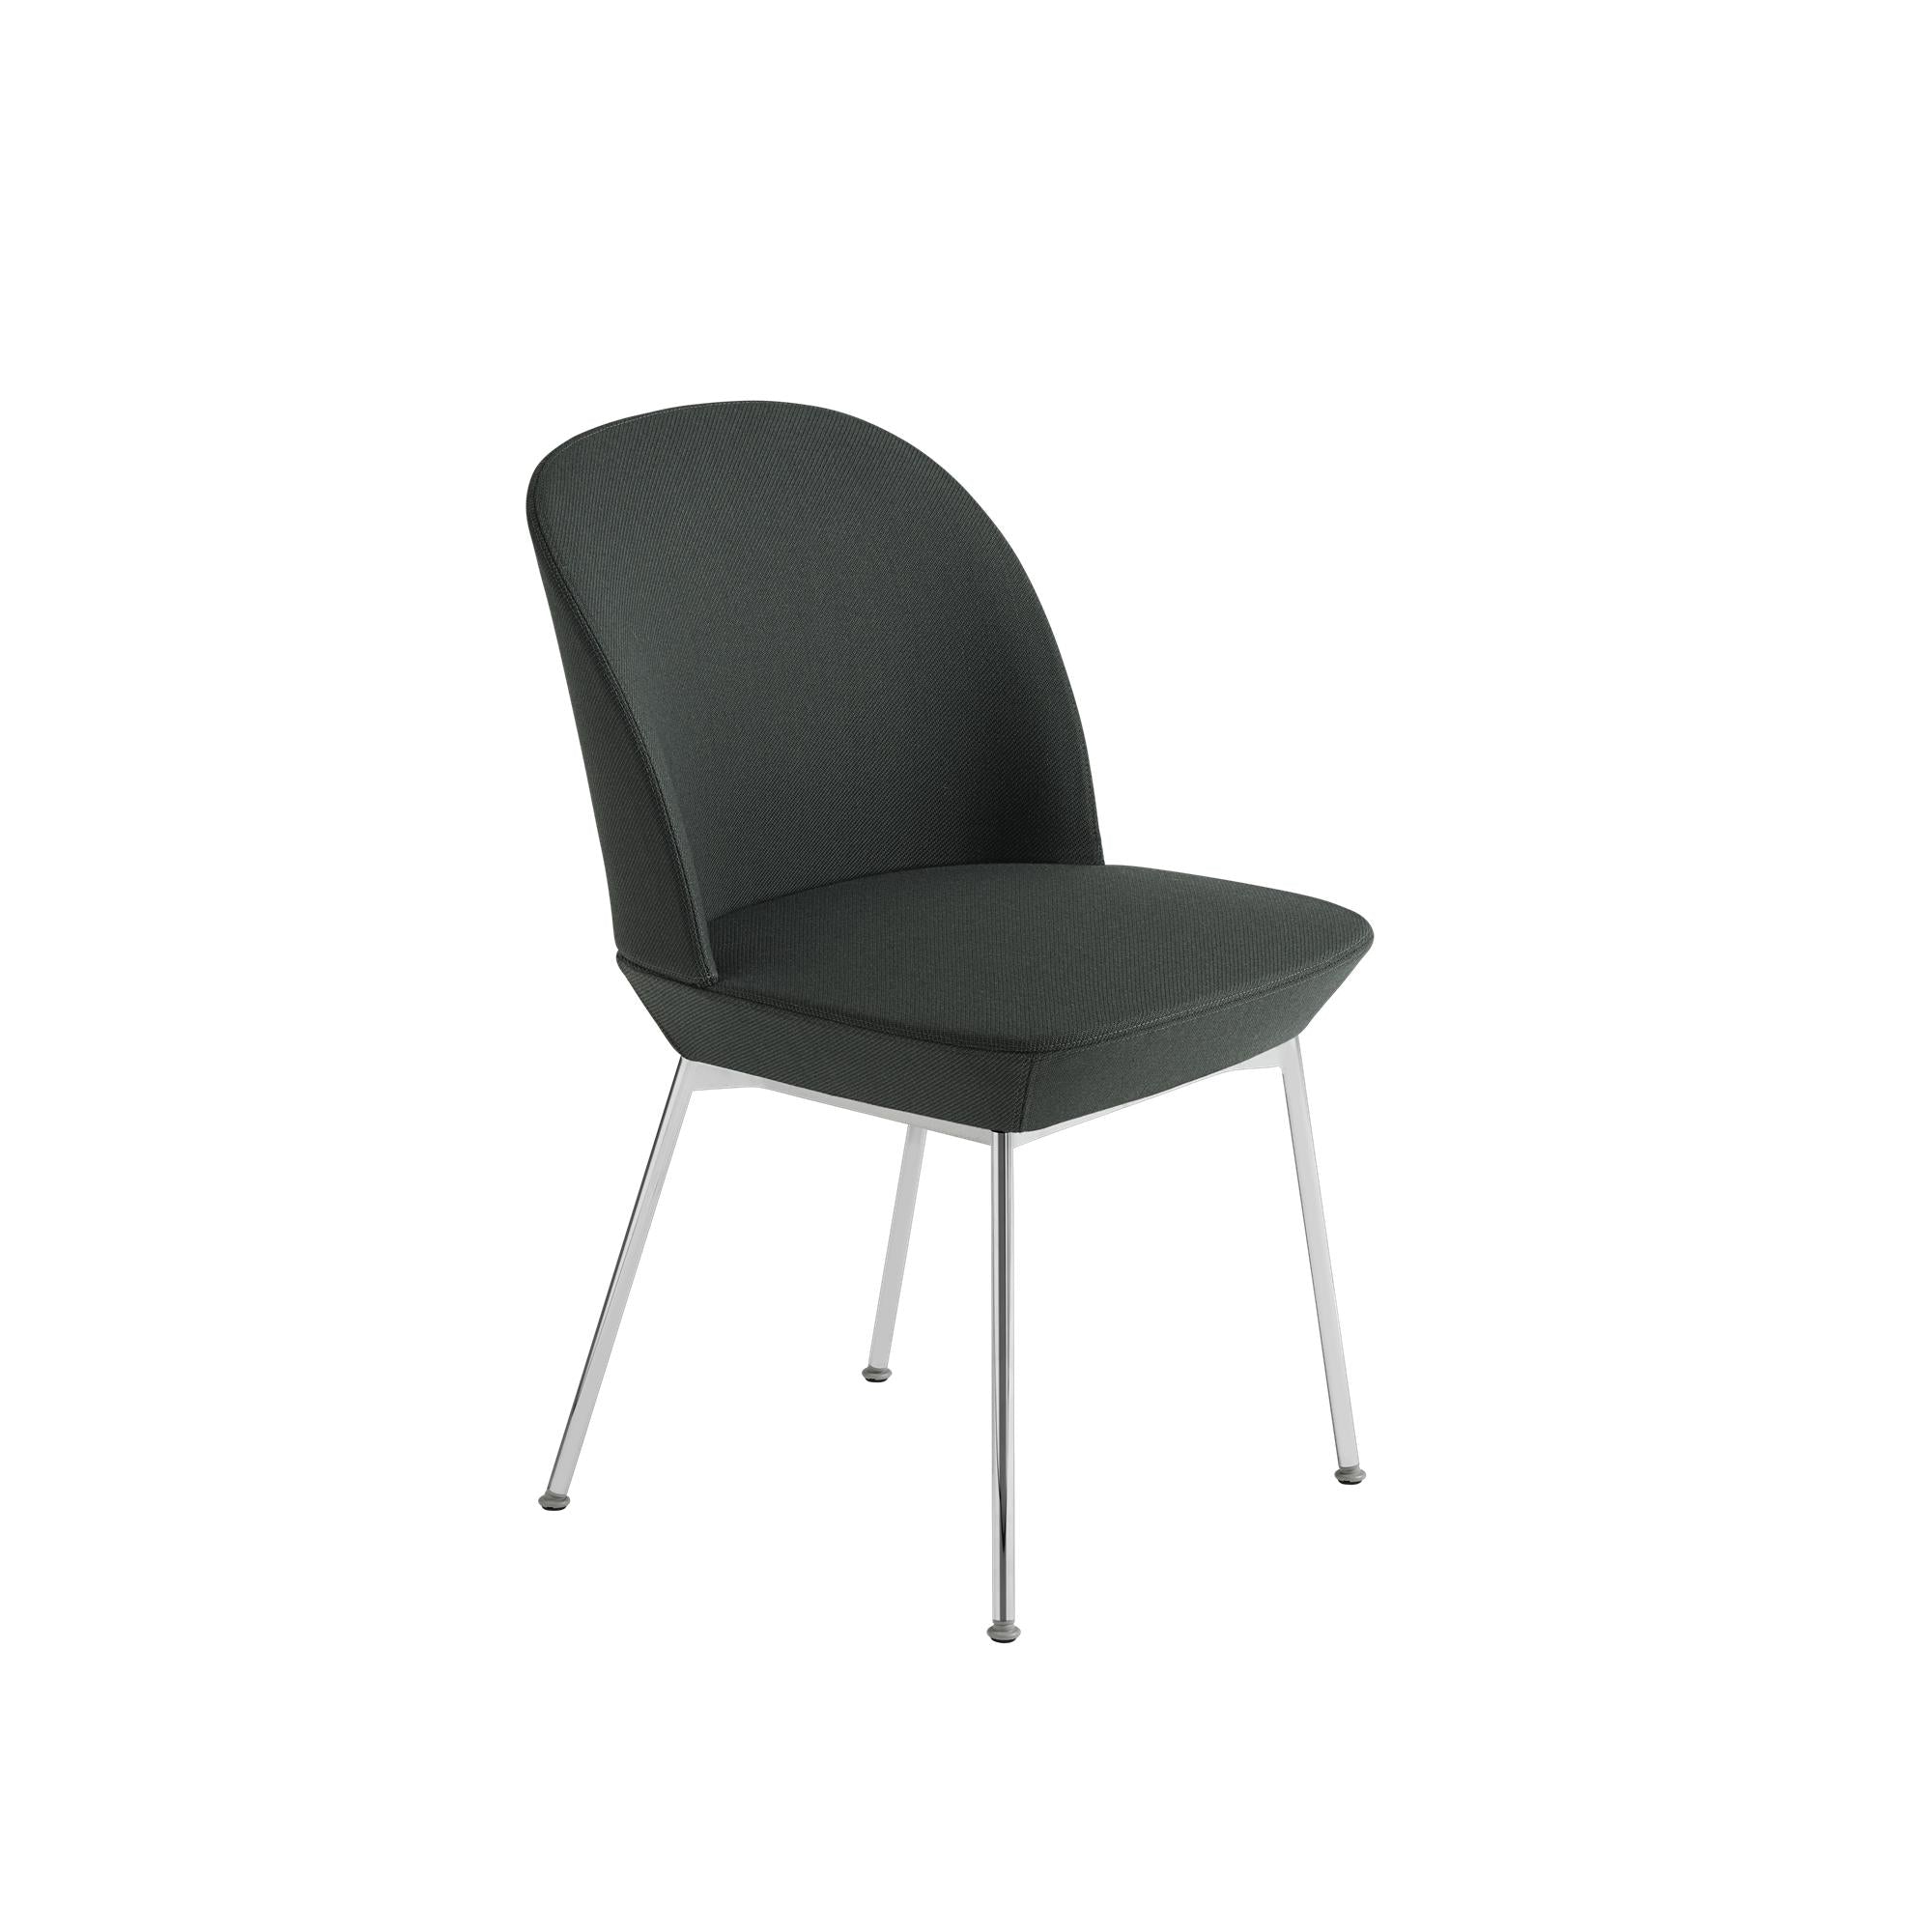 Chaise d'appoint Muuto Oslo, sergé 990